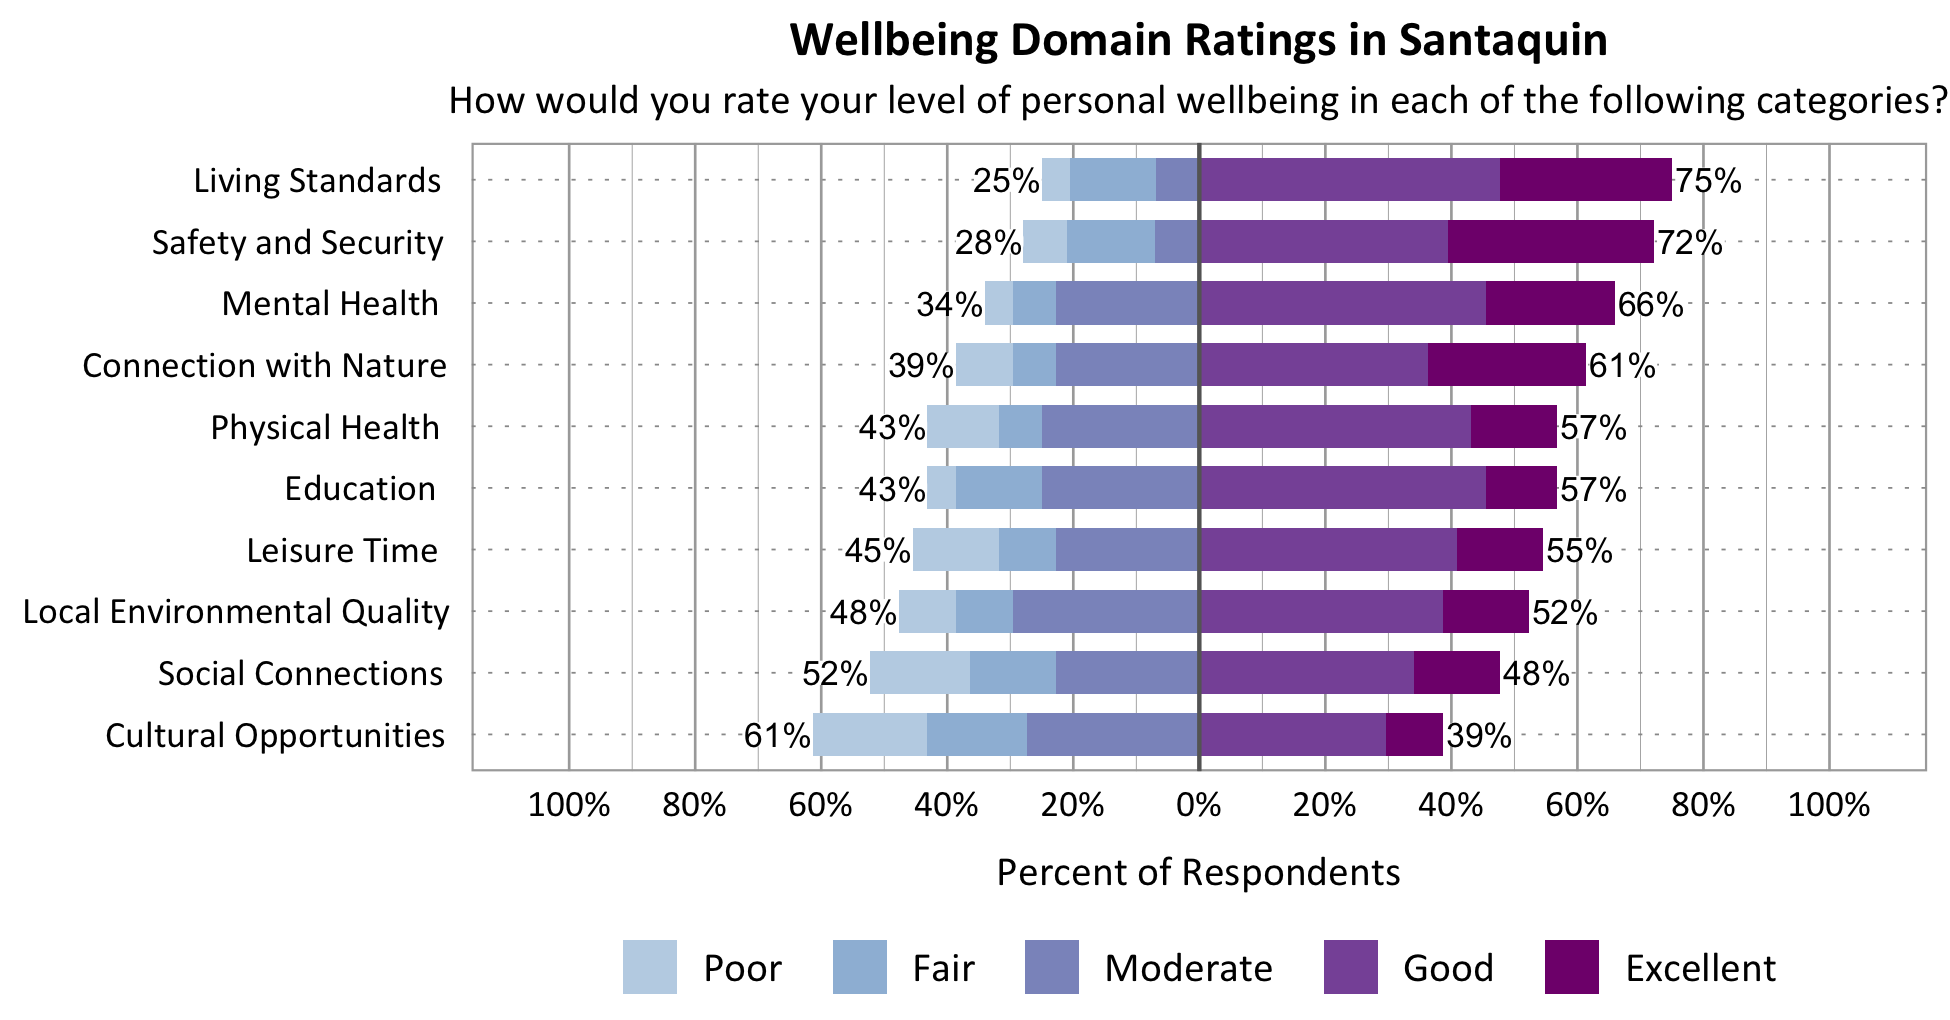 Likert Graph. Title: Wellbeing Domain Ratings in Santaquin. Subtitle: How would you rate your level of personal wellbeing in each of the following categories? Category: Safety and Security - 28% of respondents rated as poor, fair, or moderate while 72% rated as good or excellent; Category: Connection with Nature - 39% of respondents rated as poor, fair, or moderate while 61% rated as good or excellent; Category: Local Environmental Quality- 48% of respondents rated as poor, fair, or moderate while 52% rated as good or excellent; Category: Education - 43% of respondents rated as poor, fair, or moderate while 57% rated as good or excellent; Category: Living Standards - 25% of respondents rated as poor, fair, or moderate while 75% rated as good or excellent; Category: Mental Health - 34% of respondents rated as poor, fair, or moderate while 56% rated as good or excellent; Category: Leisure Time - 45% of respondents rated as poor, fair or moderate while 55% rated as good or excellent; Category: Physical Health - 43% of respondents rated as poor, fair, or moderate while 57% rated as good or excellent; Category: Social Connections - 52% of respondents rated as poor, fair, or moderate while 48% rated as good or excellent; Category: Cultural Opportunities - 61% of respondents rated as poor, fair or moderate while 39% rated as good or excellent.